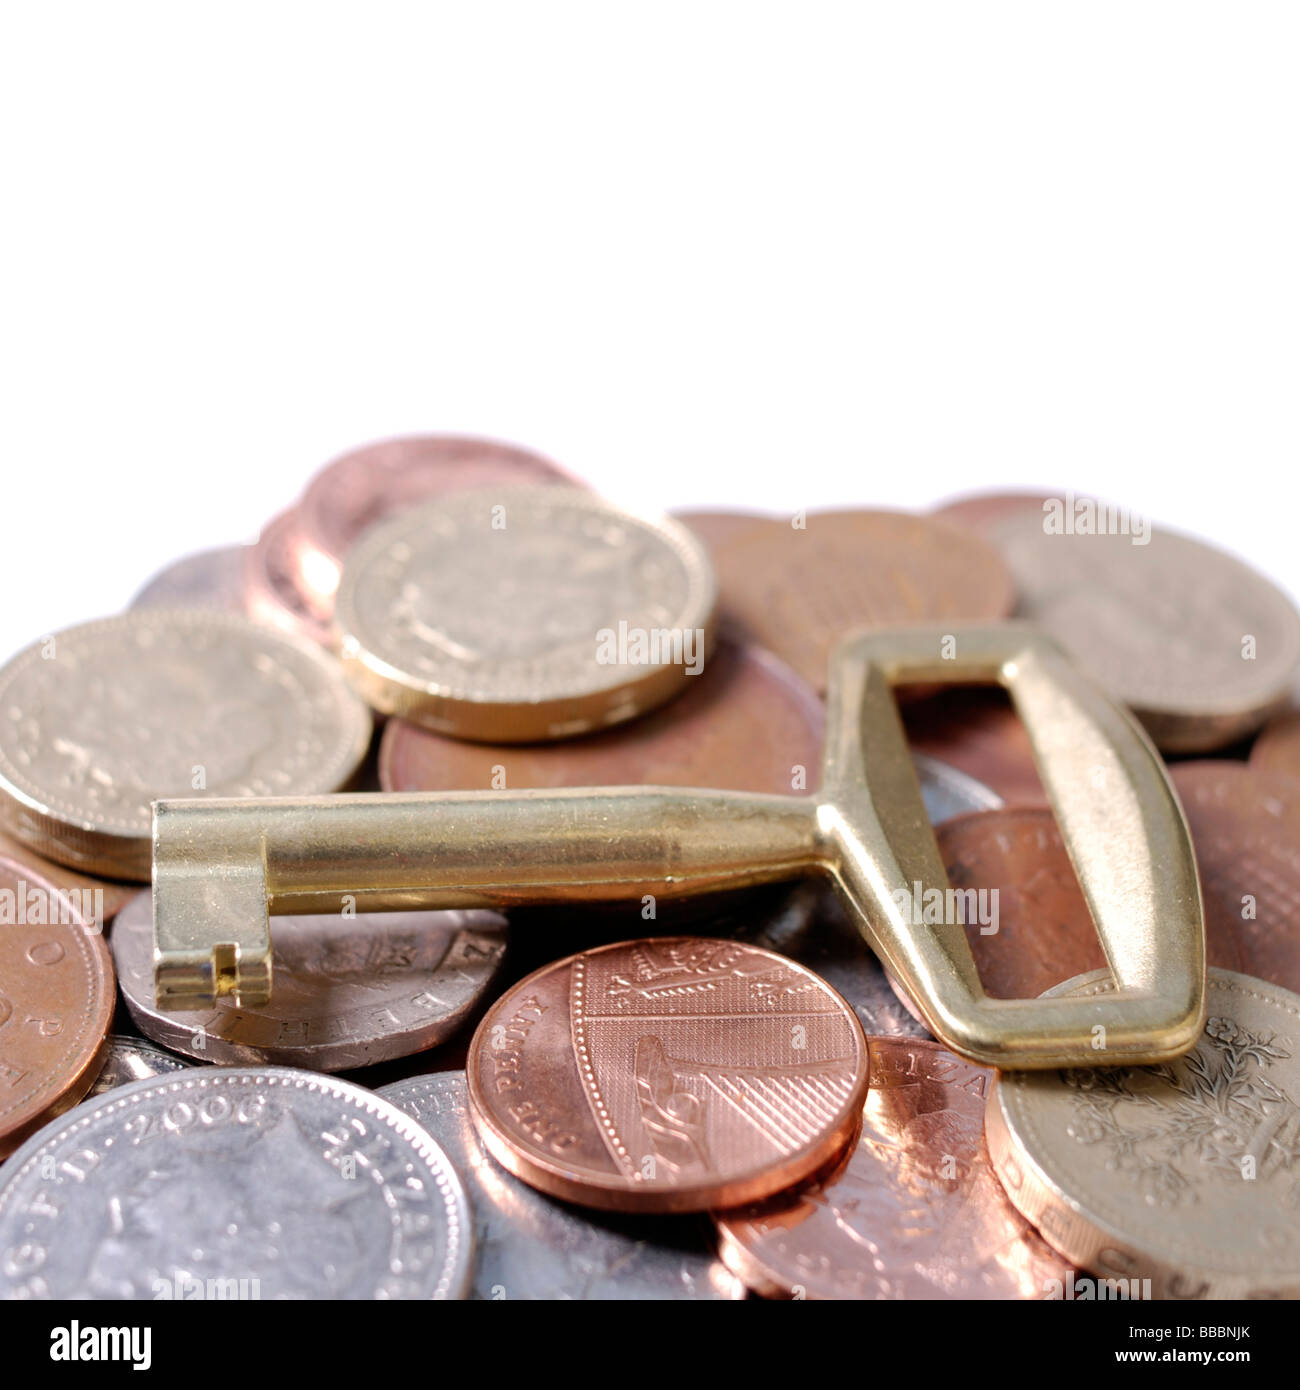 Money concept of Gold key to financial success Stock Photo